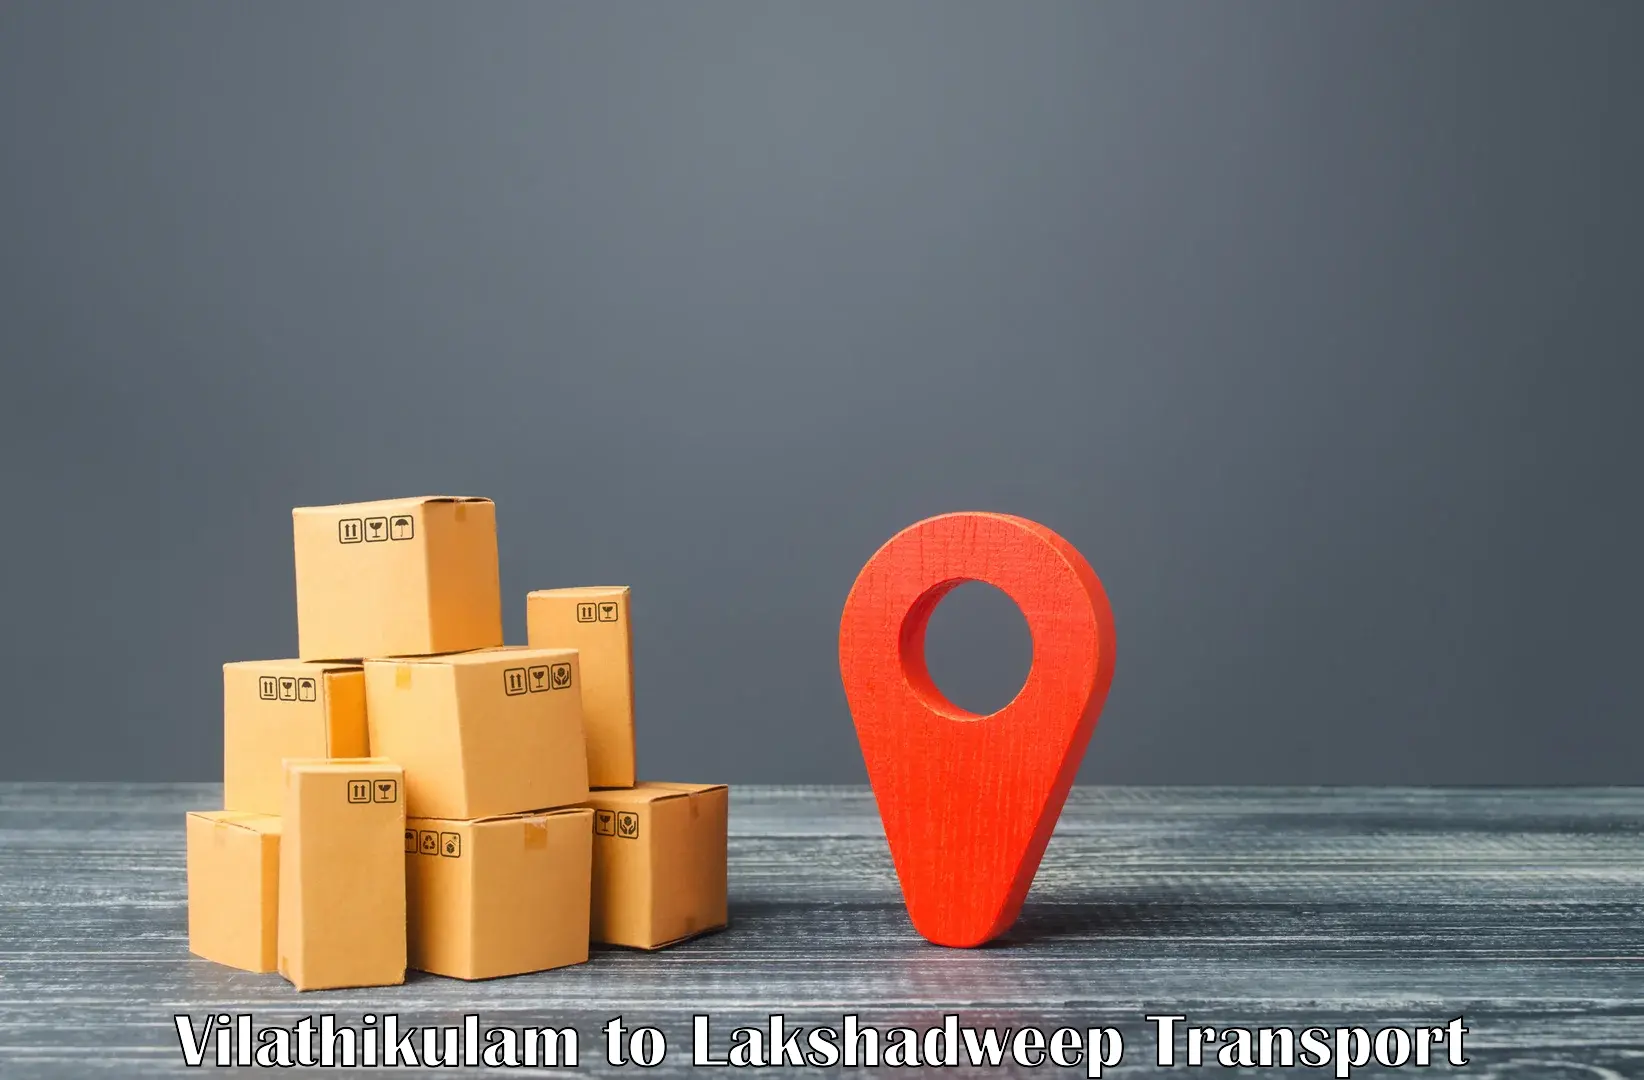 Air freight transport services in Vilathikulam to Lakshadweep